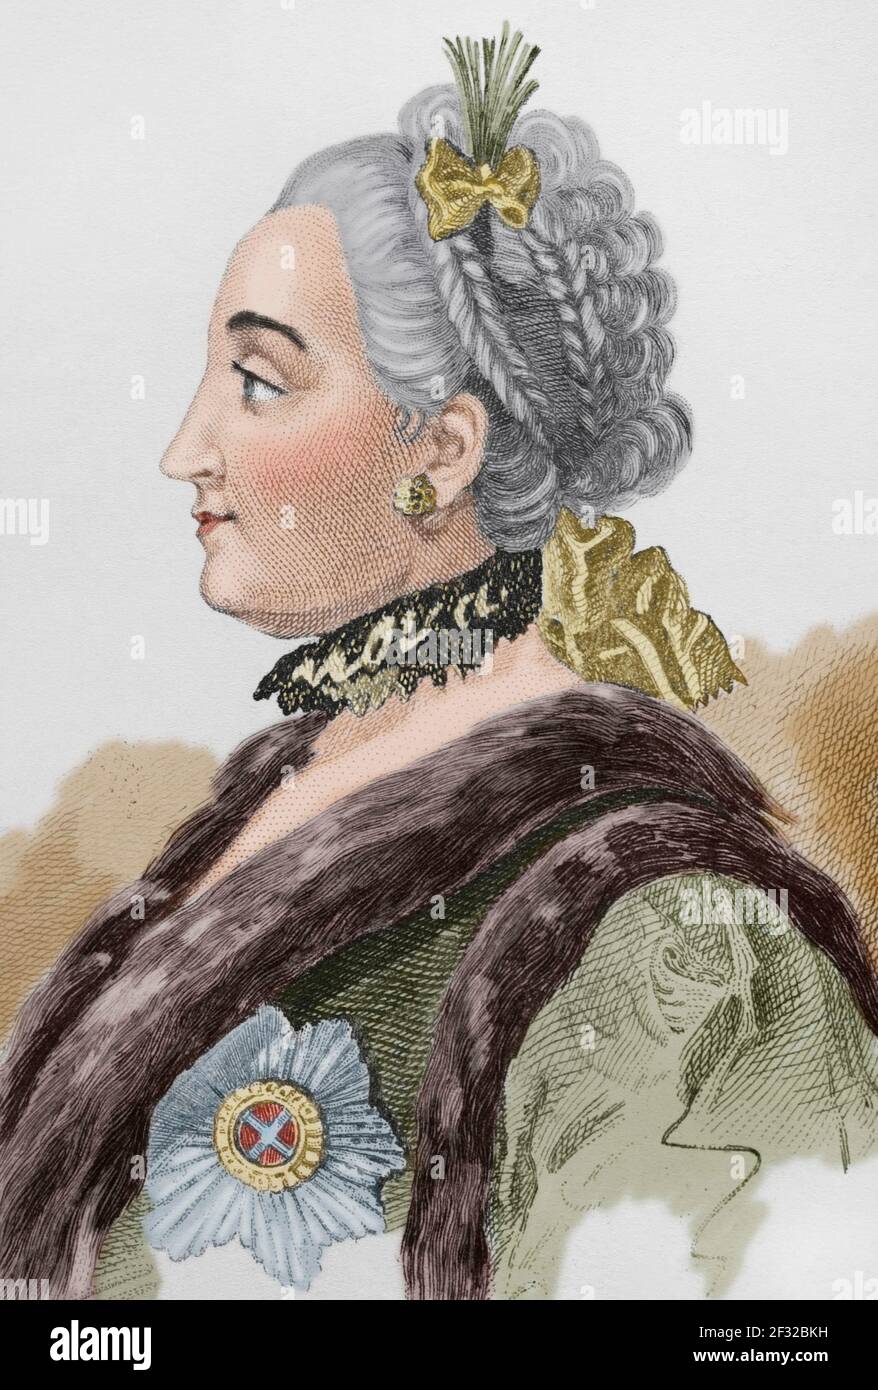 Catherine the Great or Catherine II (1729-1796). Empress of Rusia from 1762 to 1796. Portrait. Engraving by Lemaitre, Vernier and Lesueur. History of Russia by Jean Marie Chopin (1796-1870). Panorama Universal, Spanish edition, 1839. Later colouration. Stock Photo